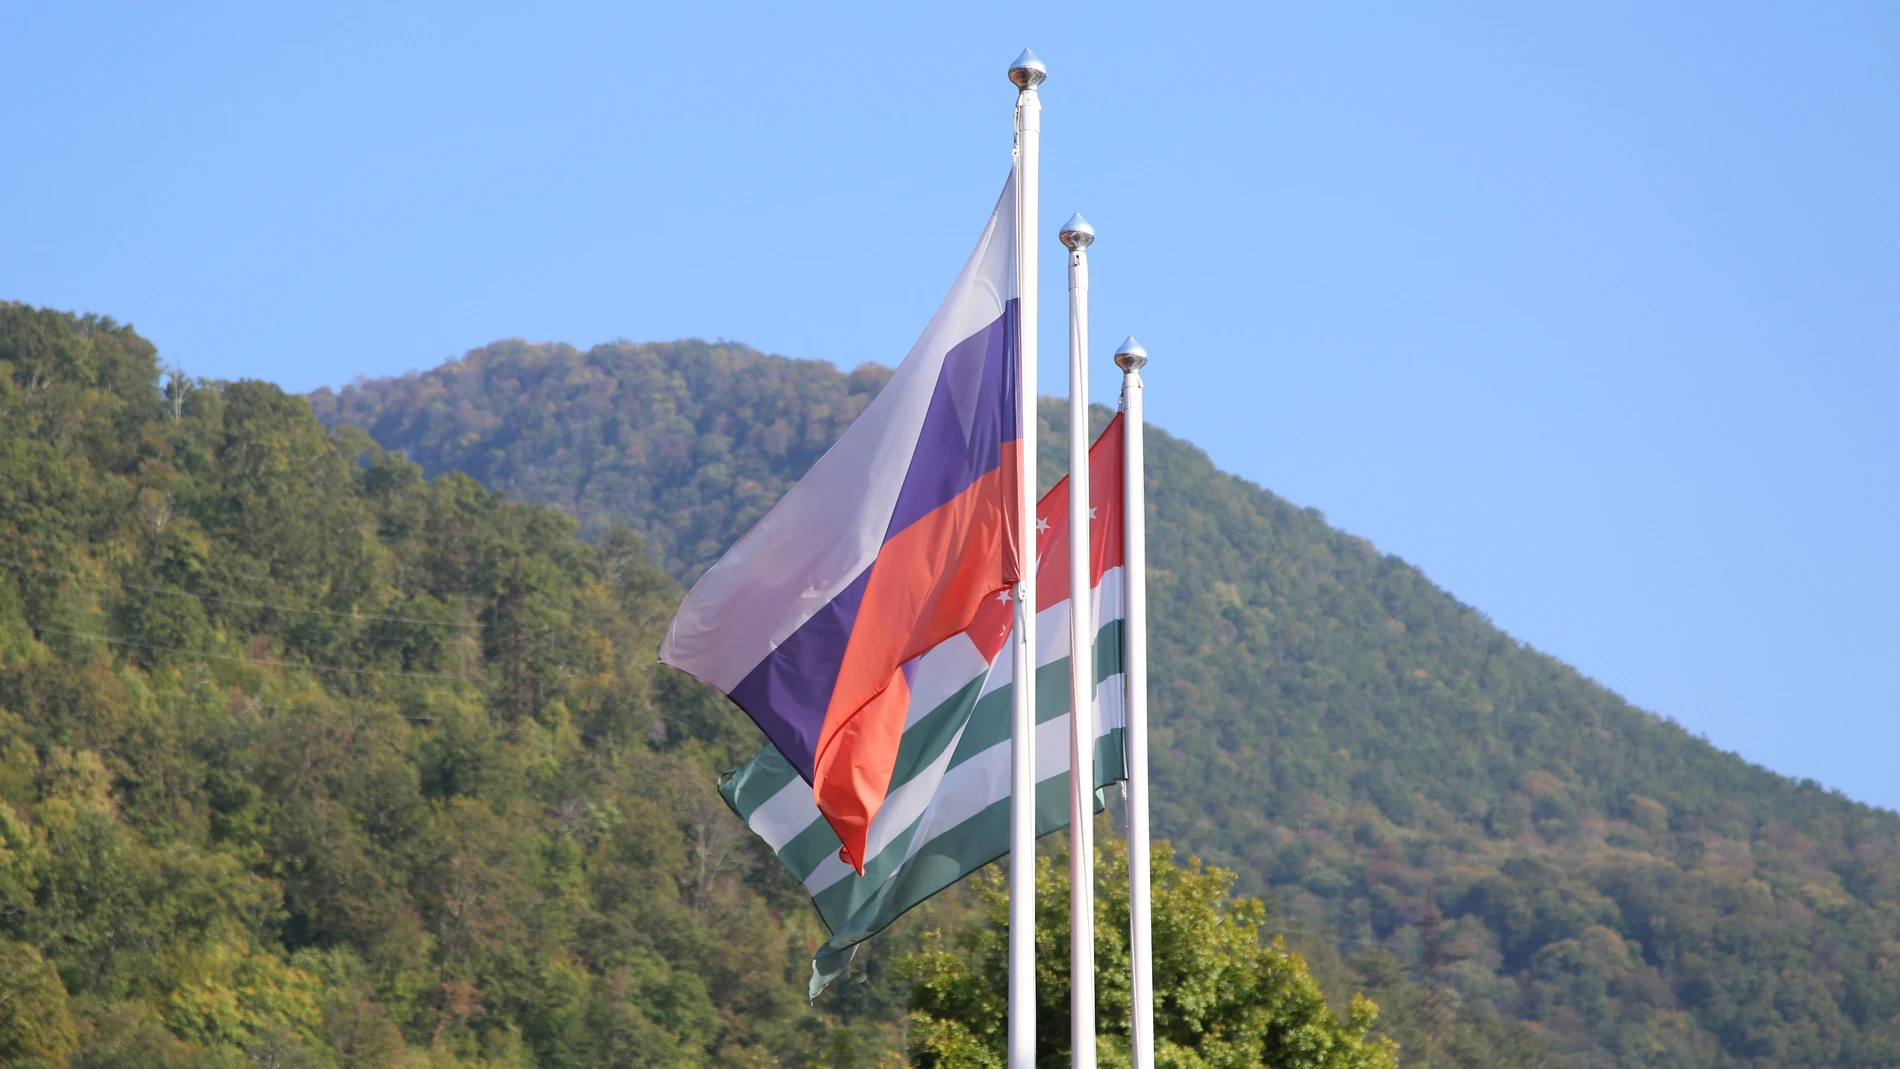 Oct 21, 2019 - Gagra, Abkhazia - On the background of the Caucasus mountains you can see Russian and Abkhazian flags together. (Foto de ARCHIVO) 21/10/2019